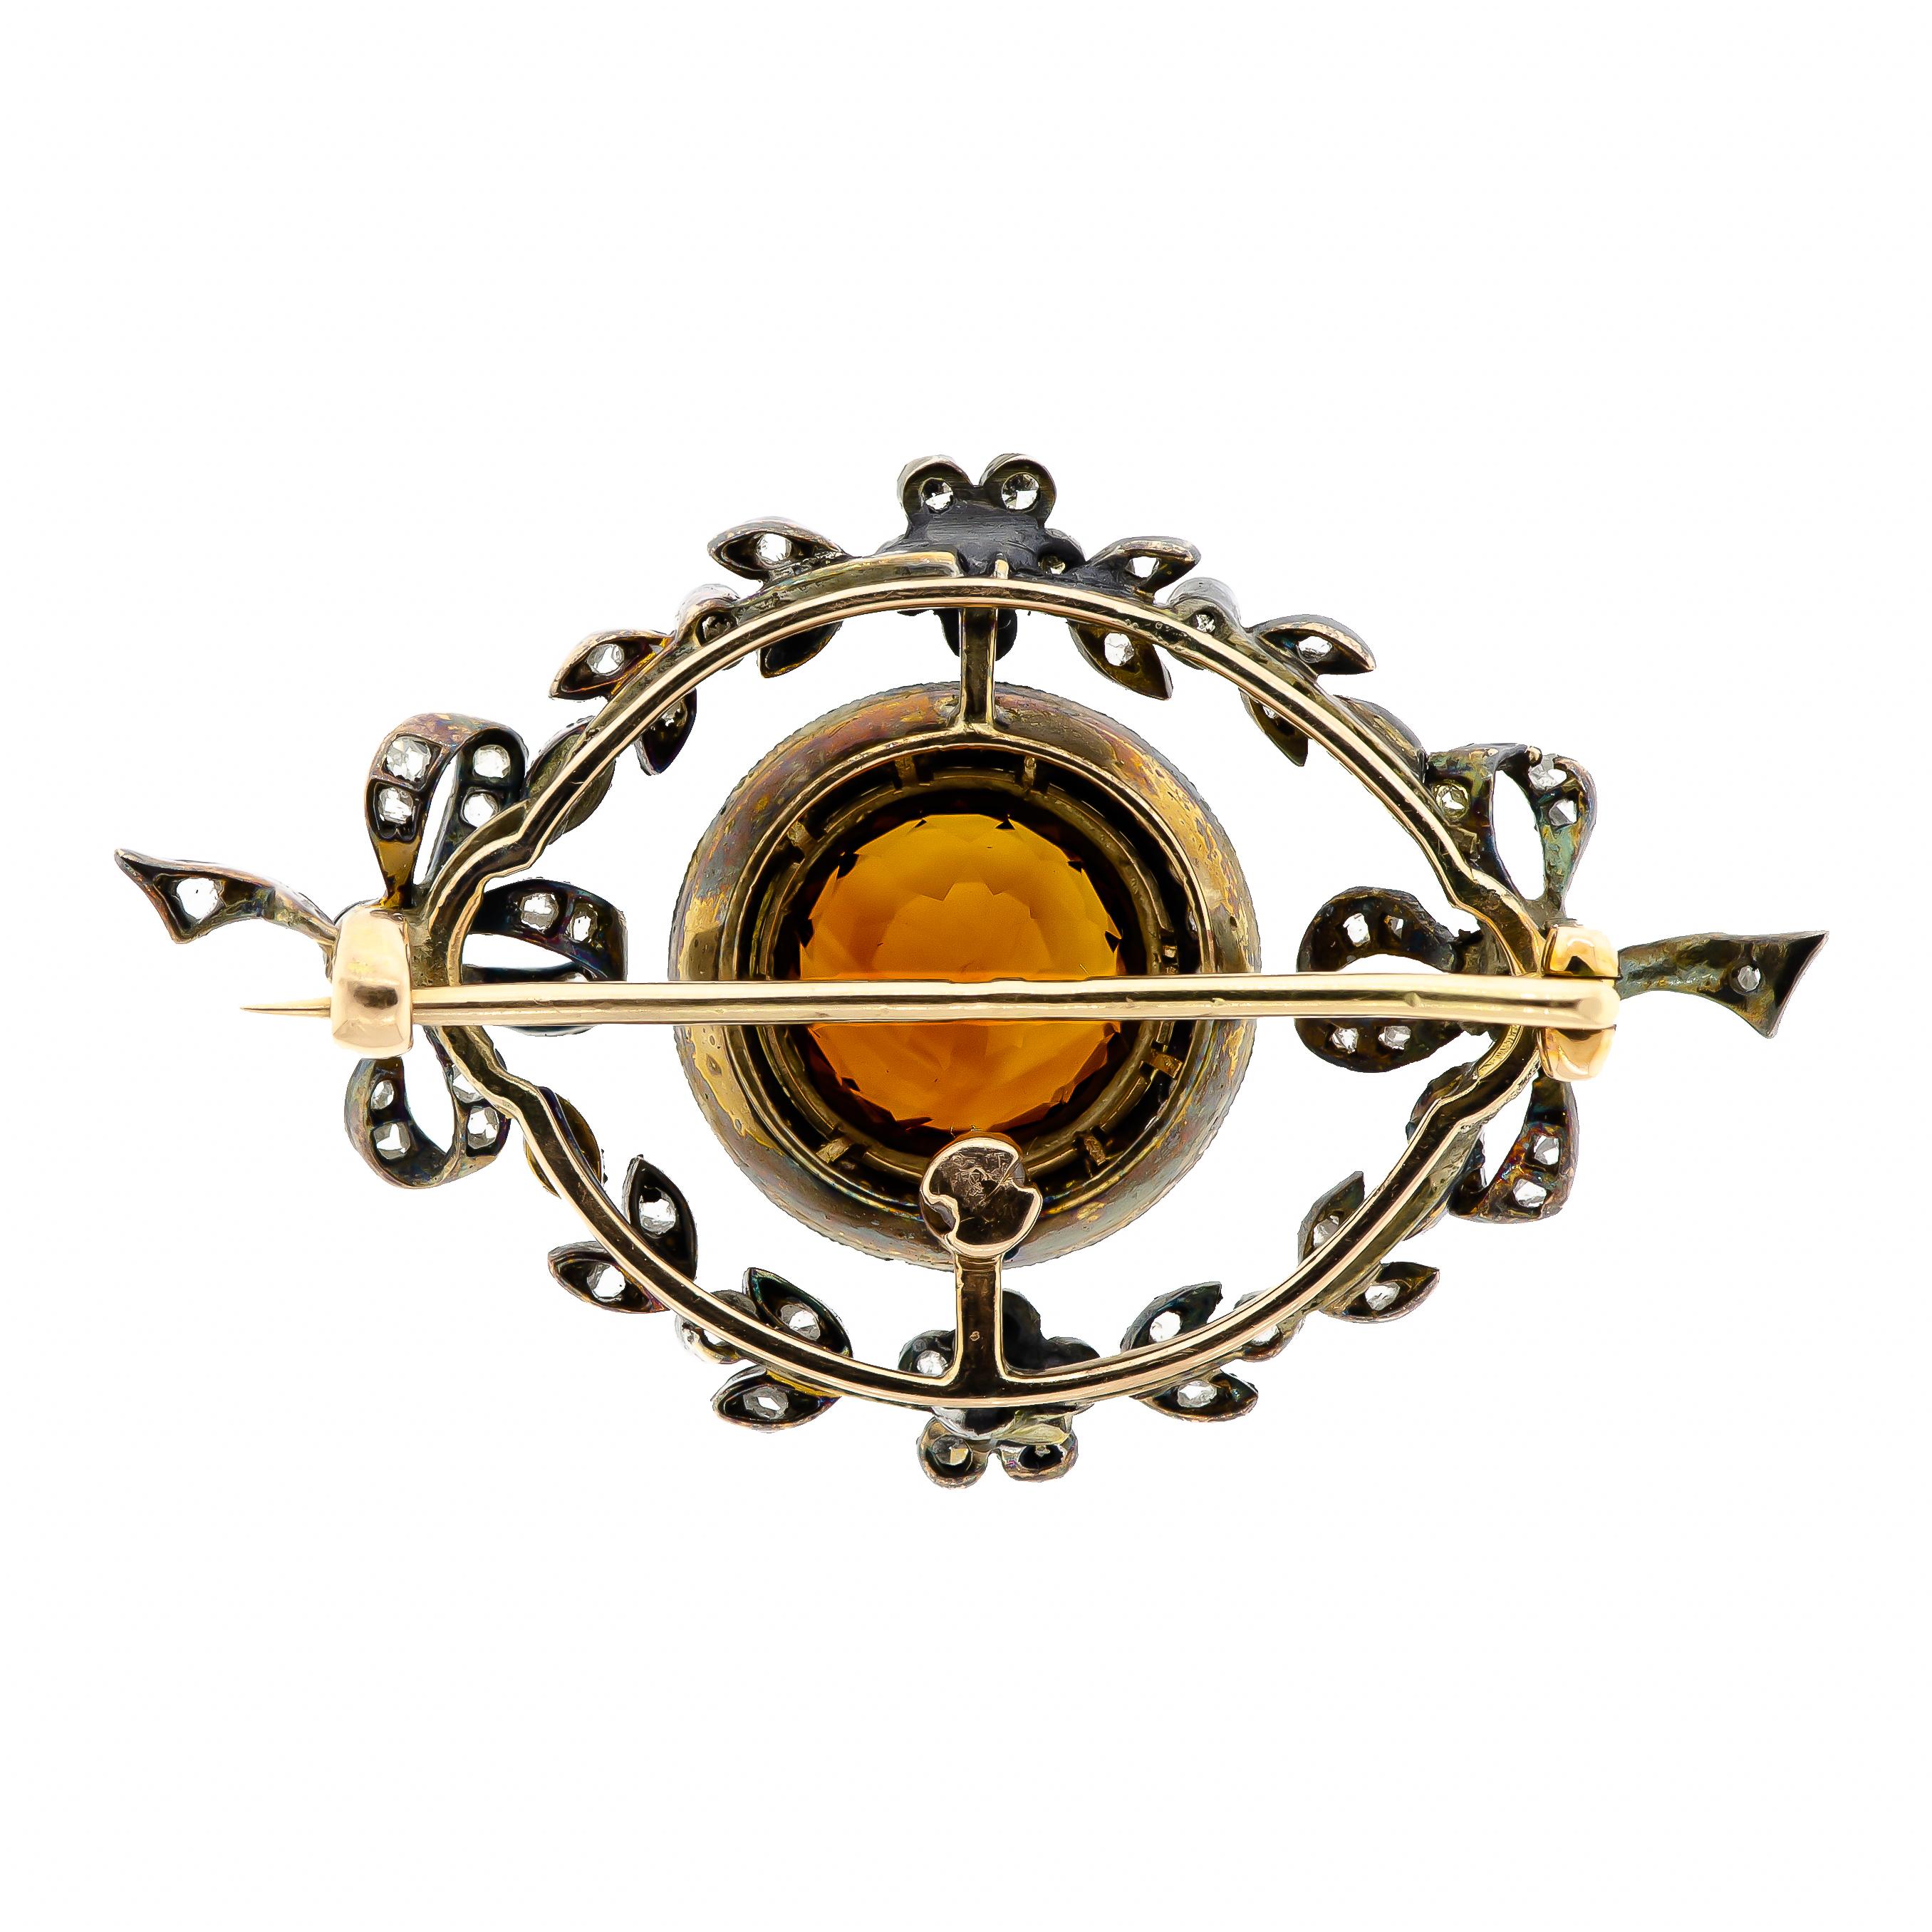 Beautiful Edwardian citrine and diamond brooch bow and foliate motif central set brilliant cut round citrine surrounded by a circle of rose cut diamonds further embellished with rose cut and old cut diamonds in bow foliate motif silver topped yellow